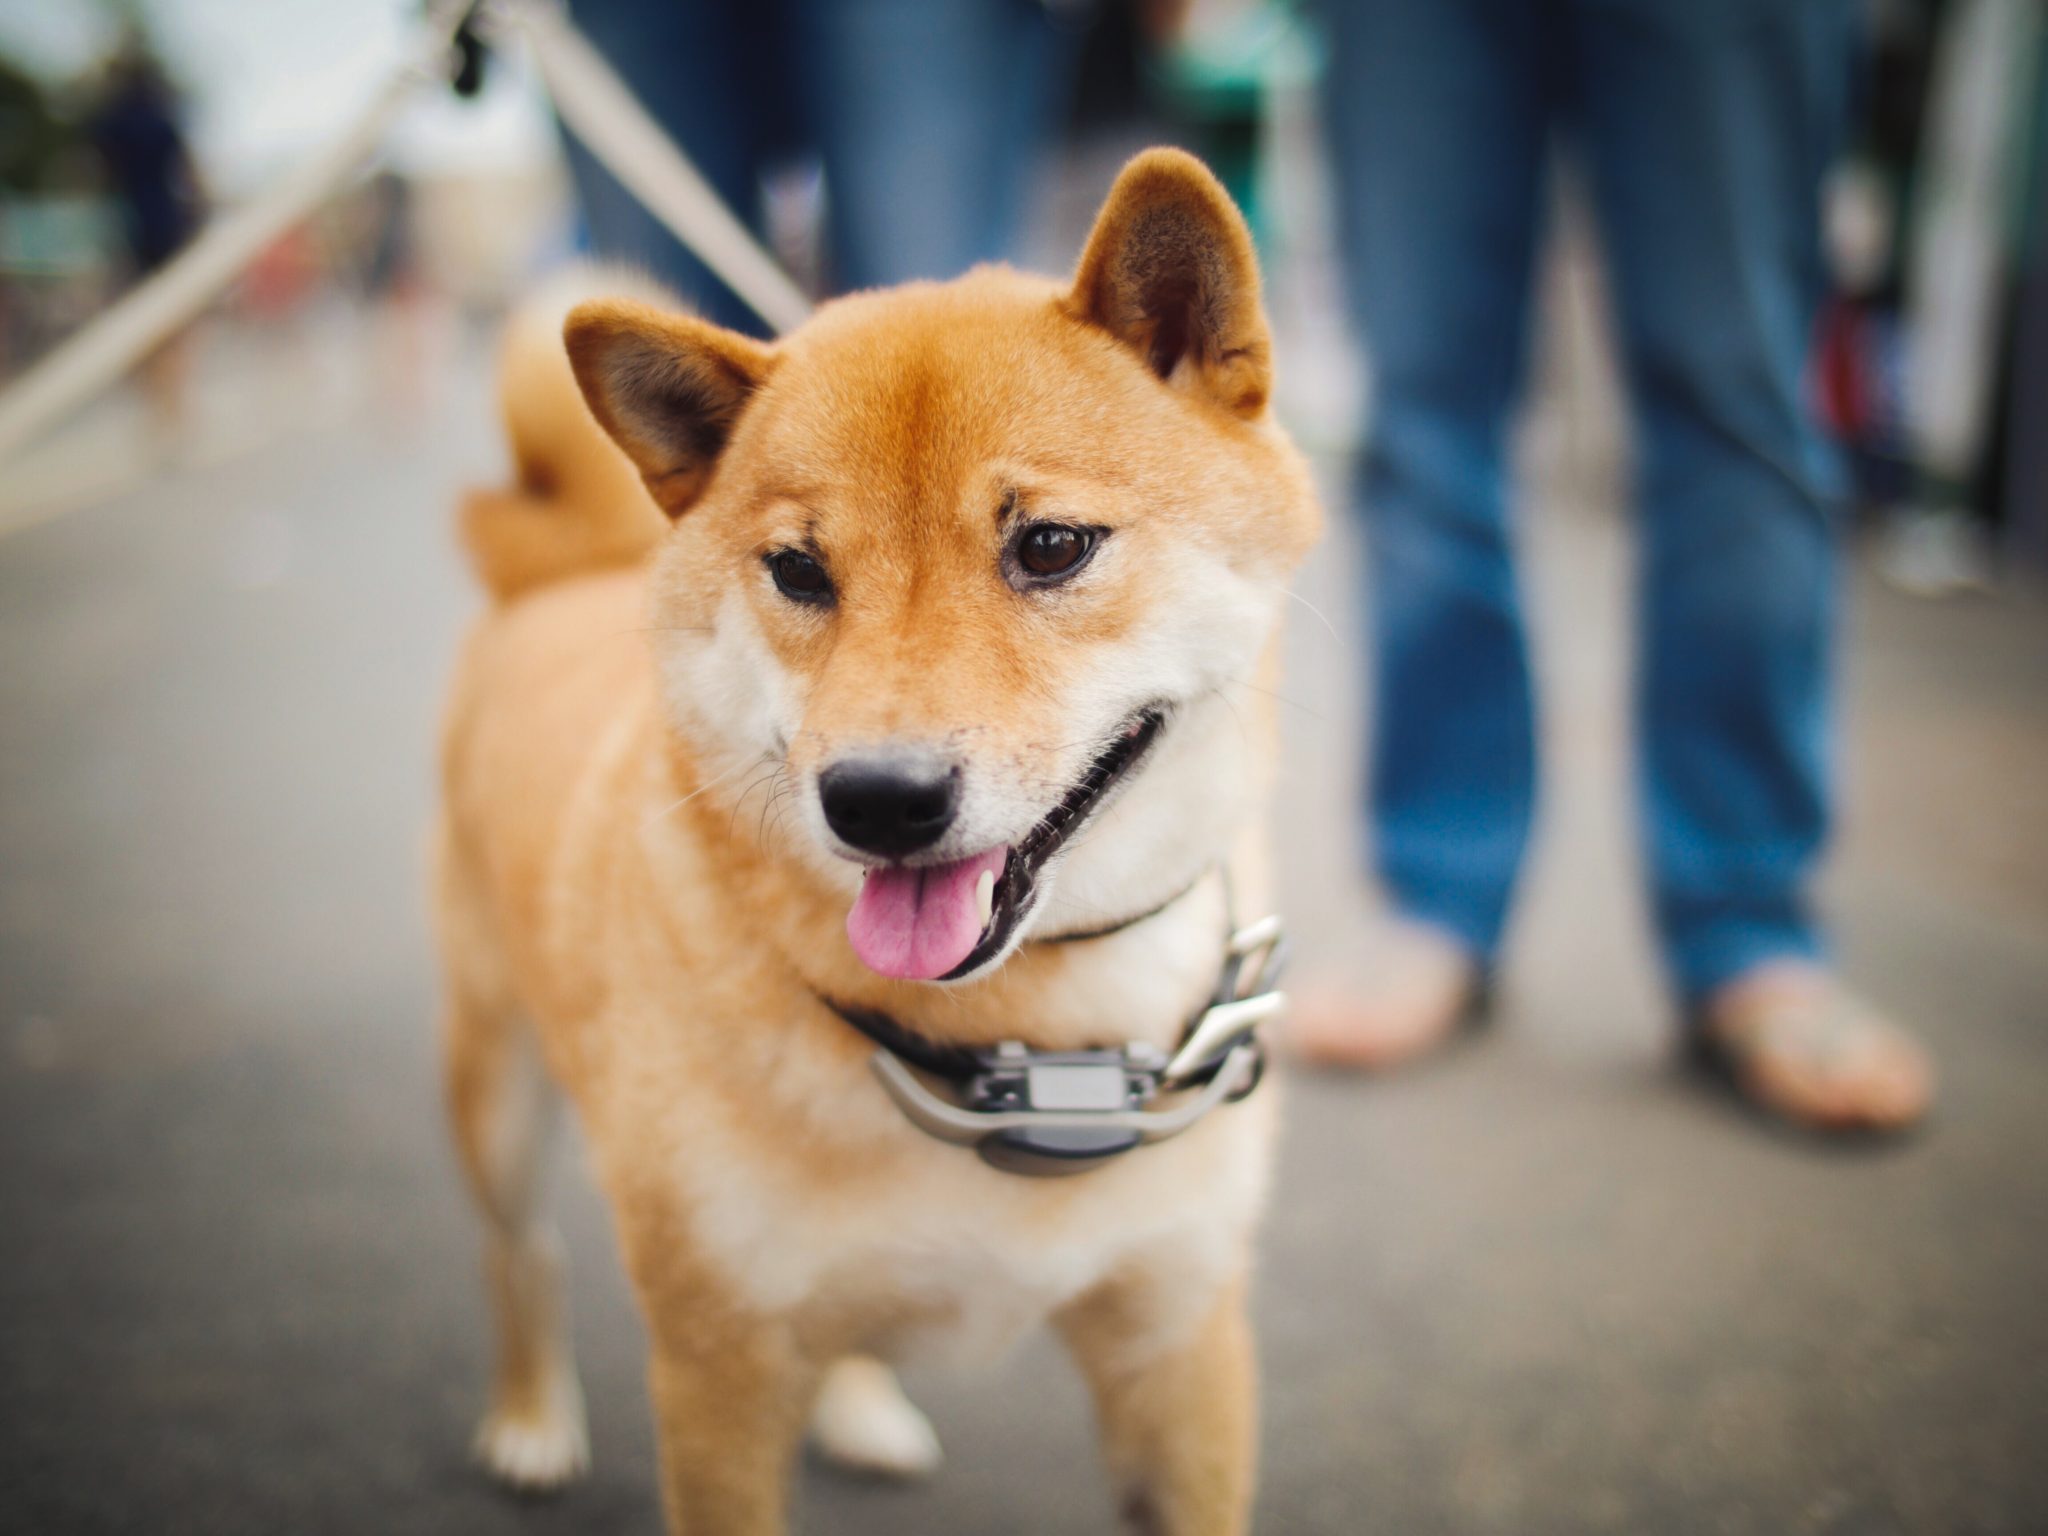 OKEx Lists New Dogecoin Spawn, Baby Doge, Amid DOGE Price ...